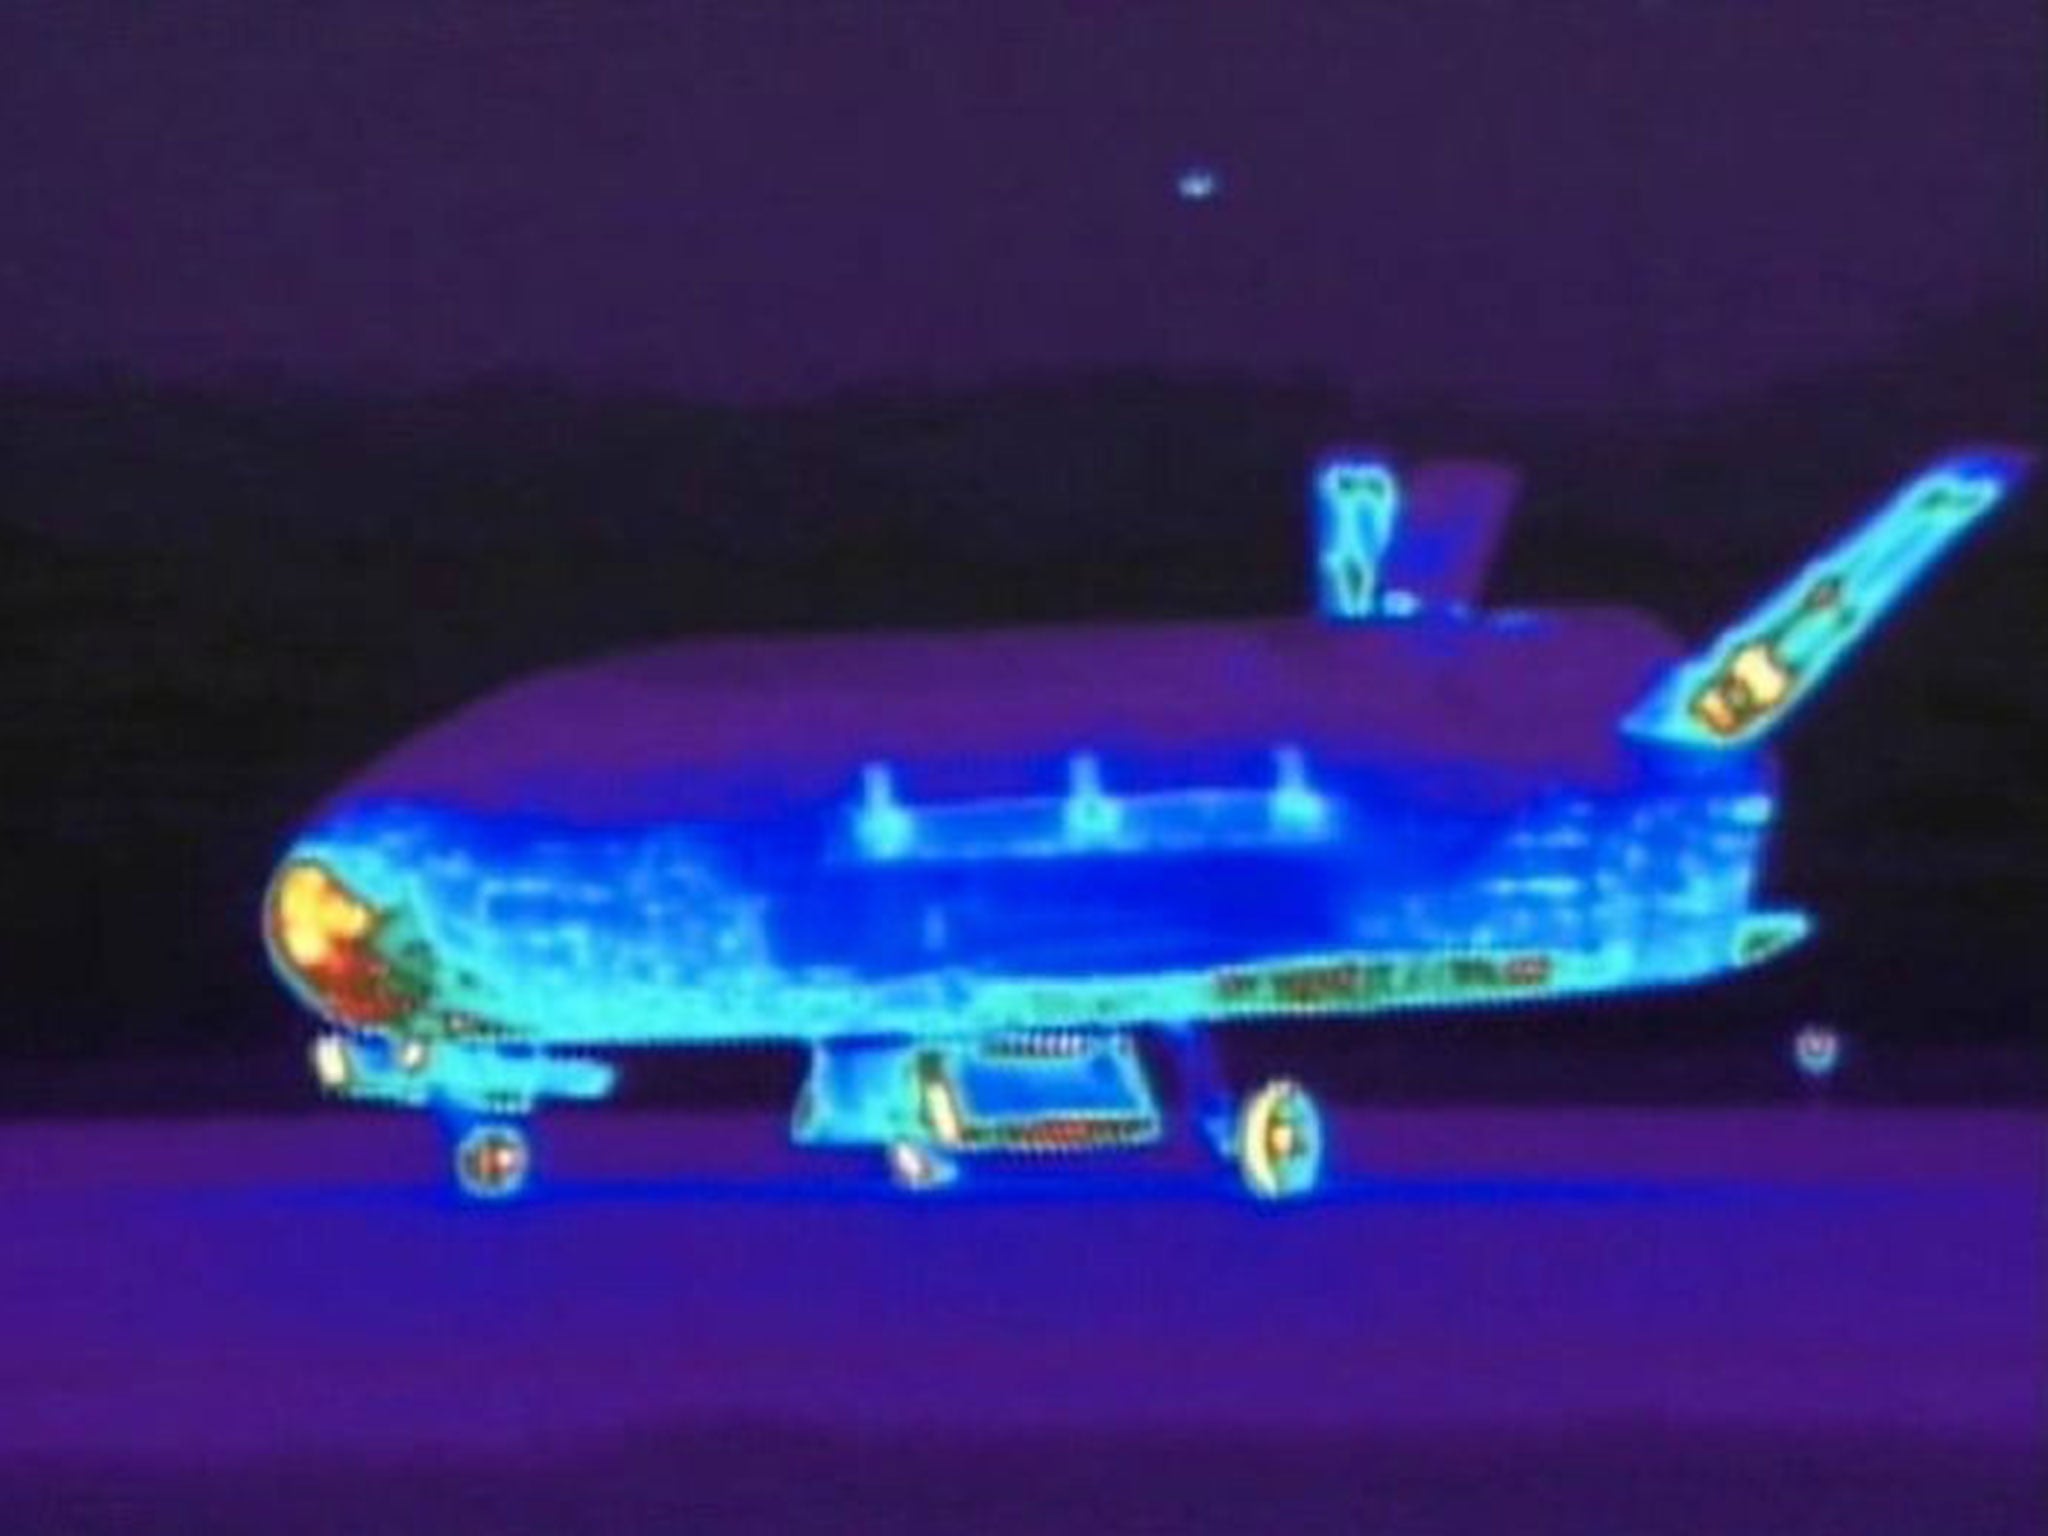 England America Xxx Video - Top secret space plane: American X-37B aircraft lands after secret mission  lasting almost two years | The Independent | The Independent